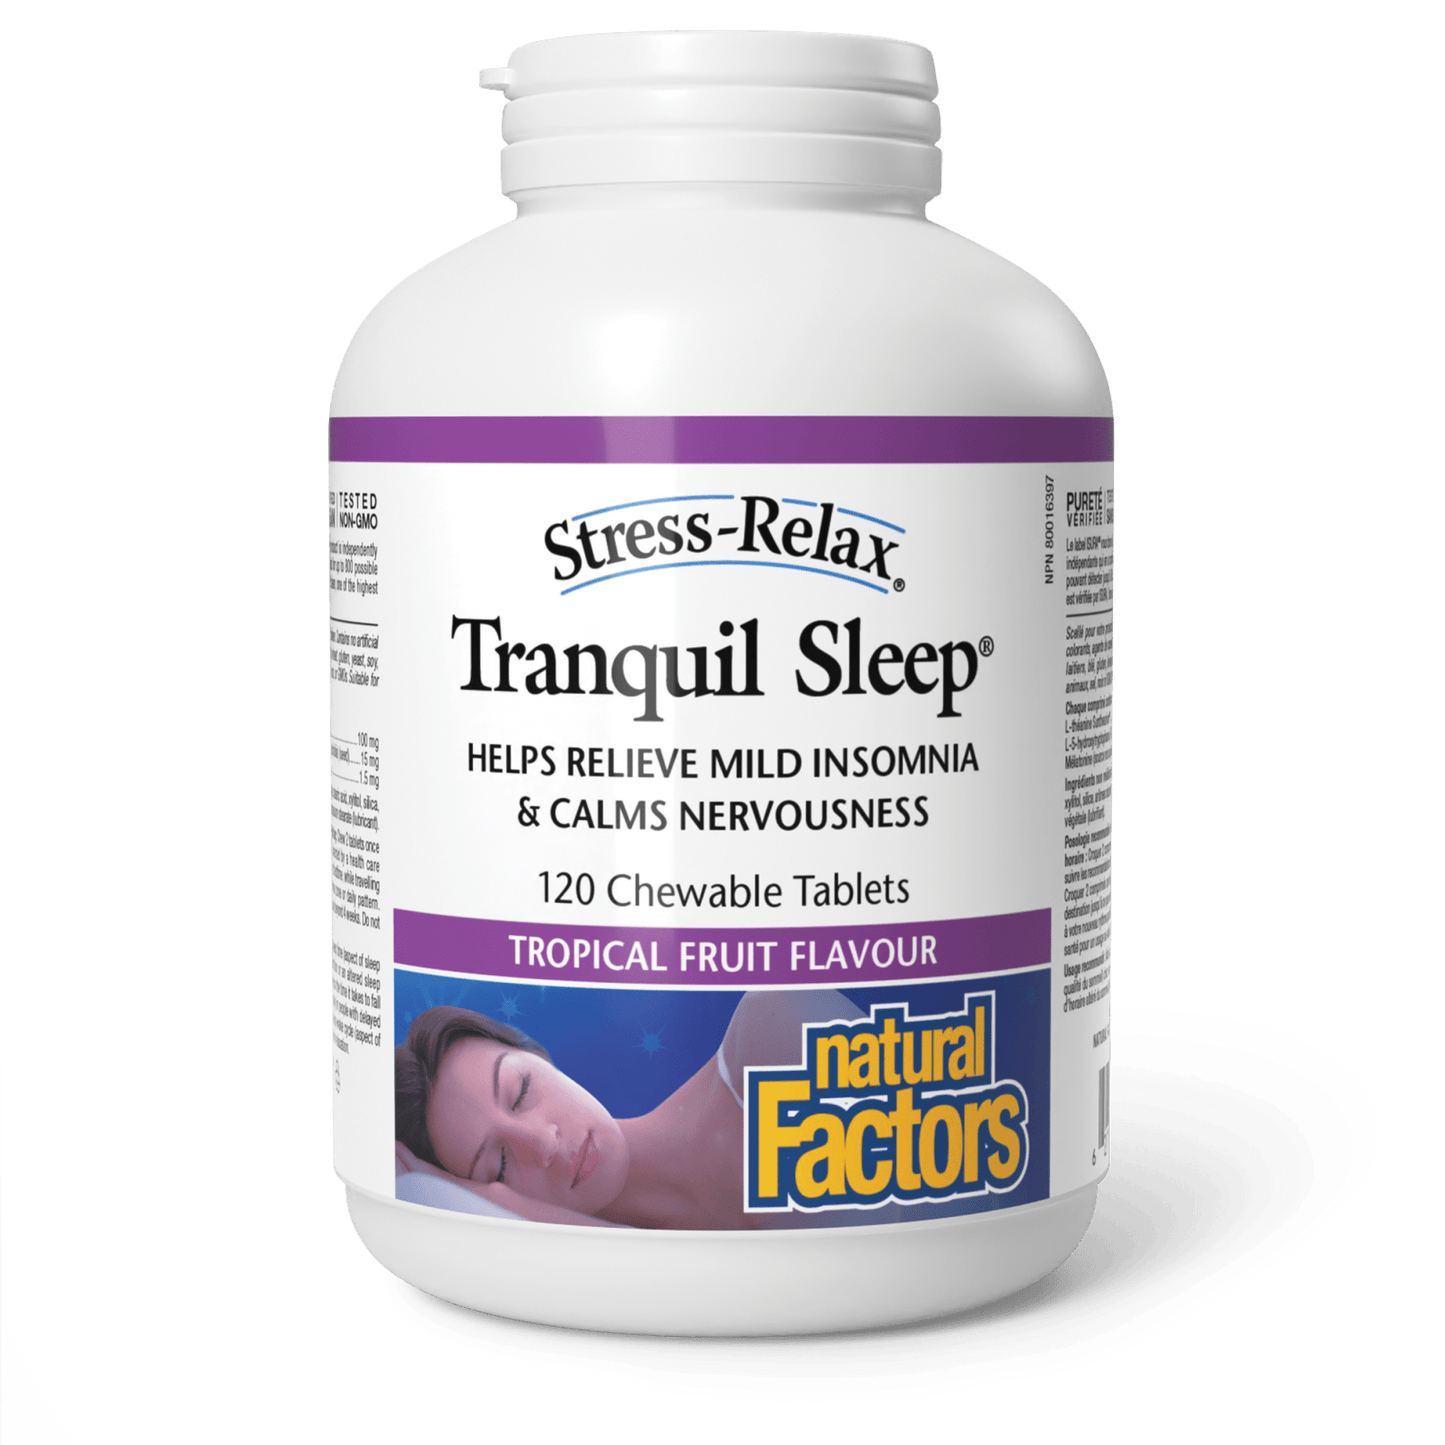 Tranquil Sleep, Tropical Fruit, Stress-Relax, Natural Factors|v|image|2843